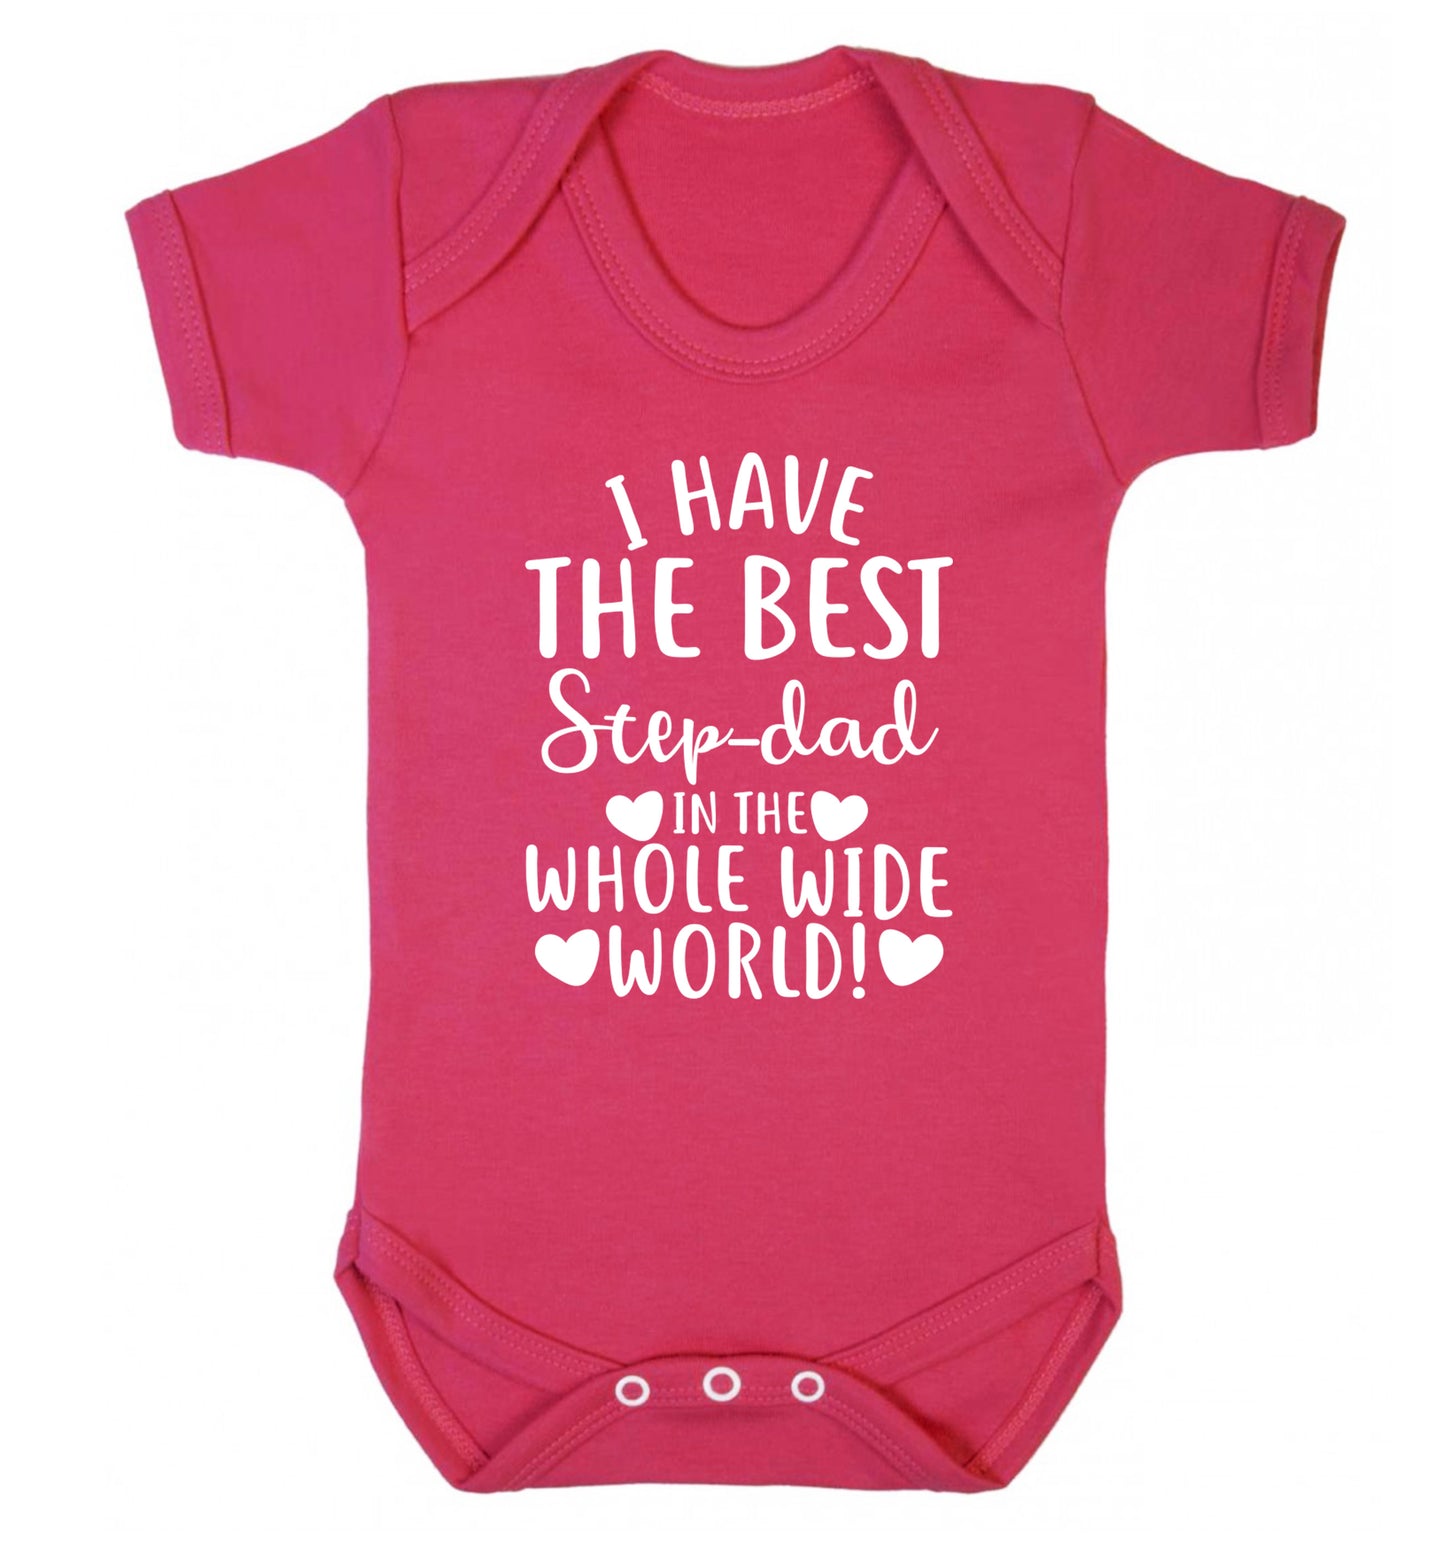 I have the best step-dad in the whole wide world! Baby Vest dark pink 18-24 months